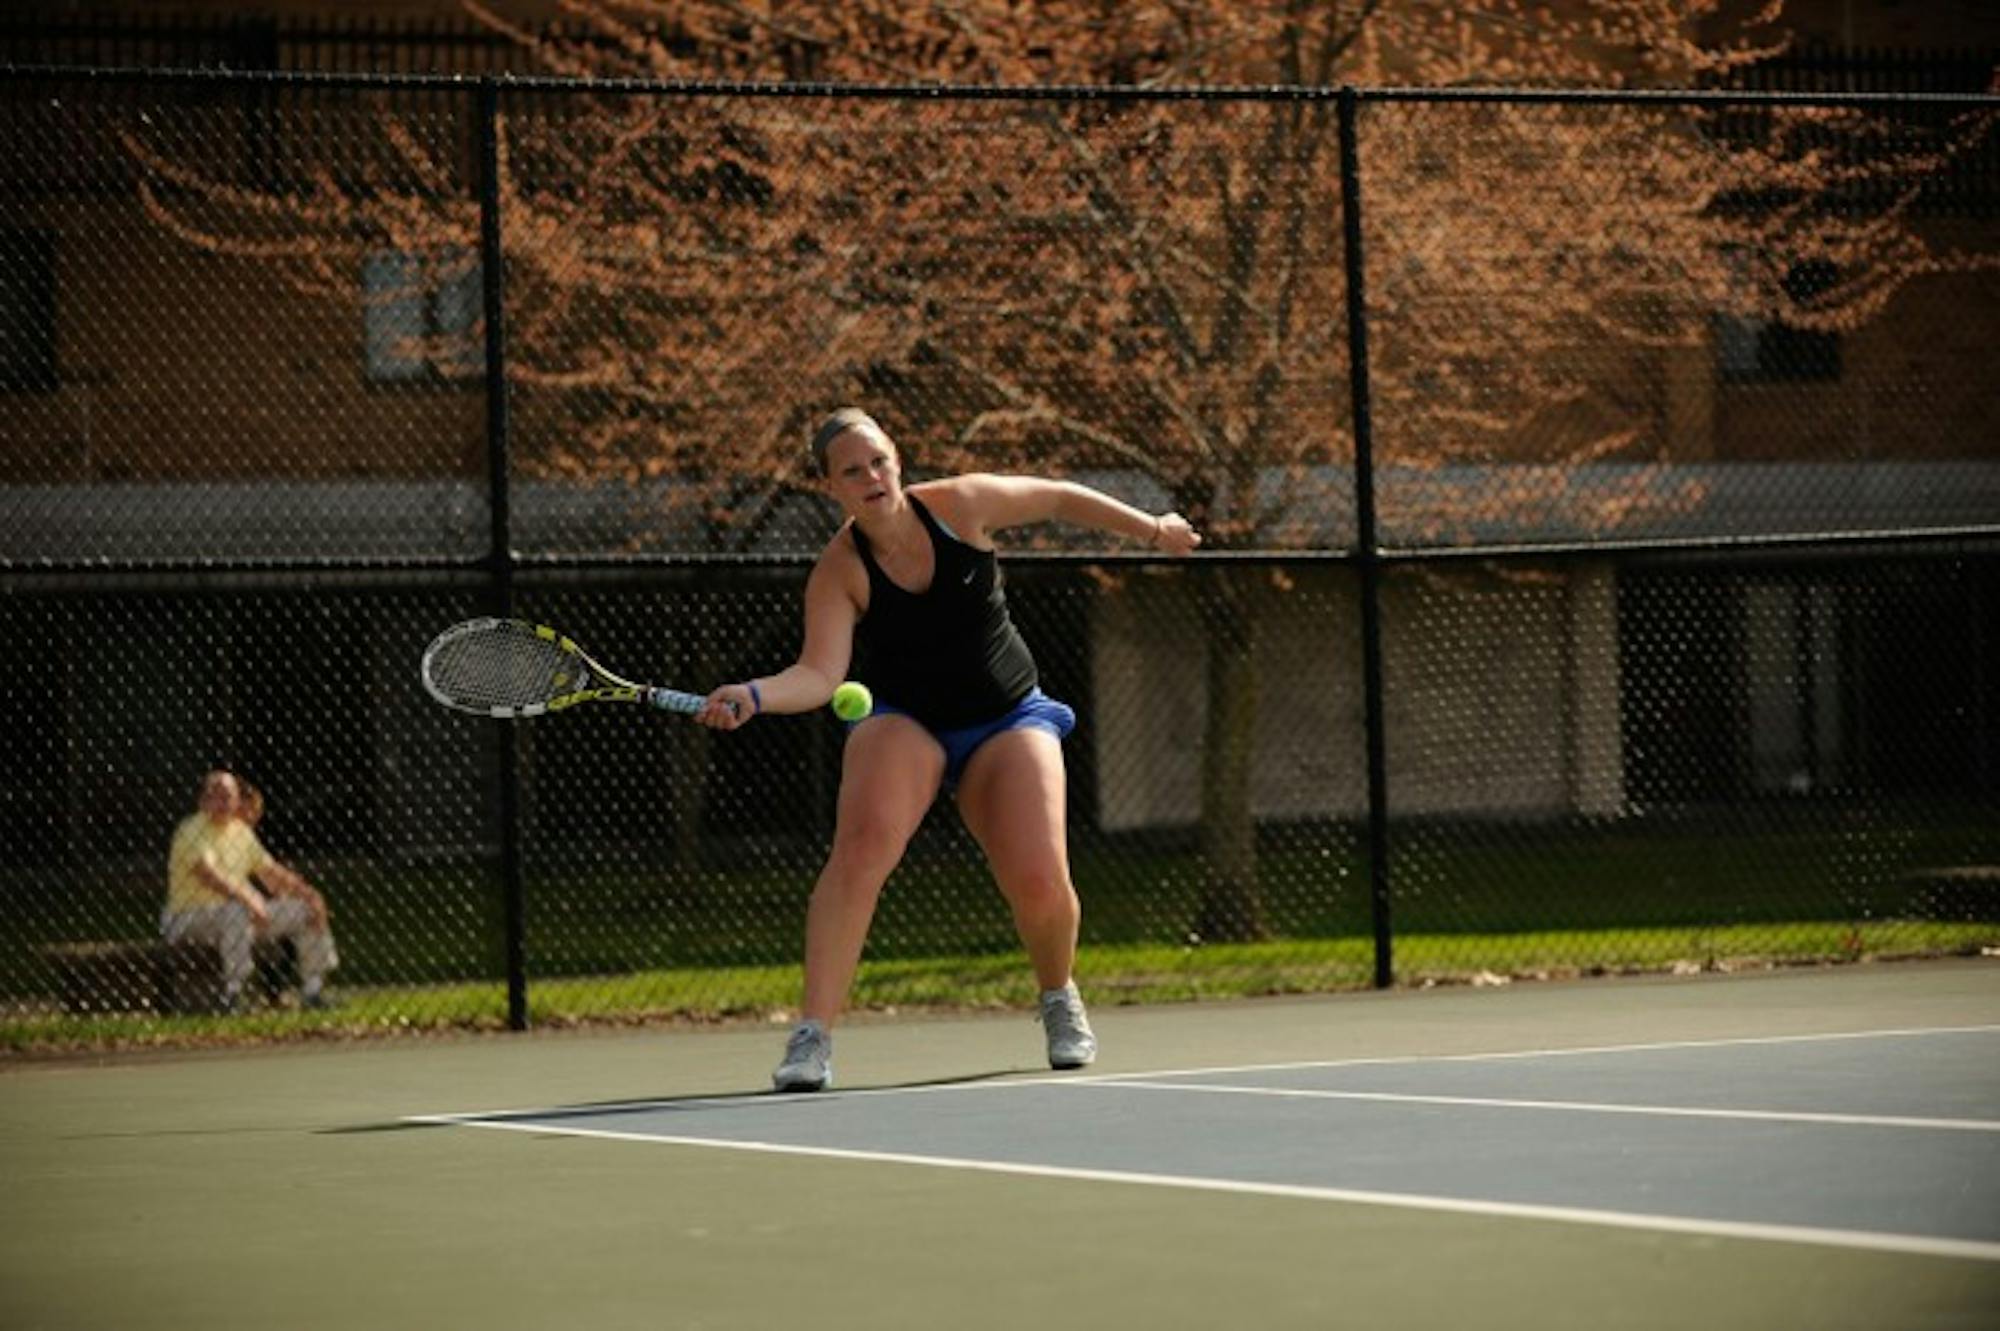 Belles sophomore Sam Setterblad returns a serve during Saint Mary’s 8-1 win over Adrian on April 14 at Saint Mary’s Tennis Courts.